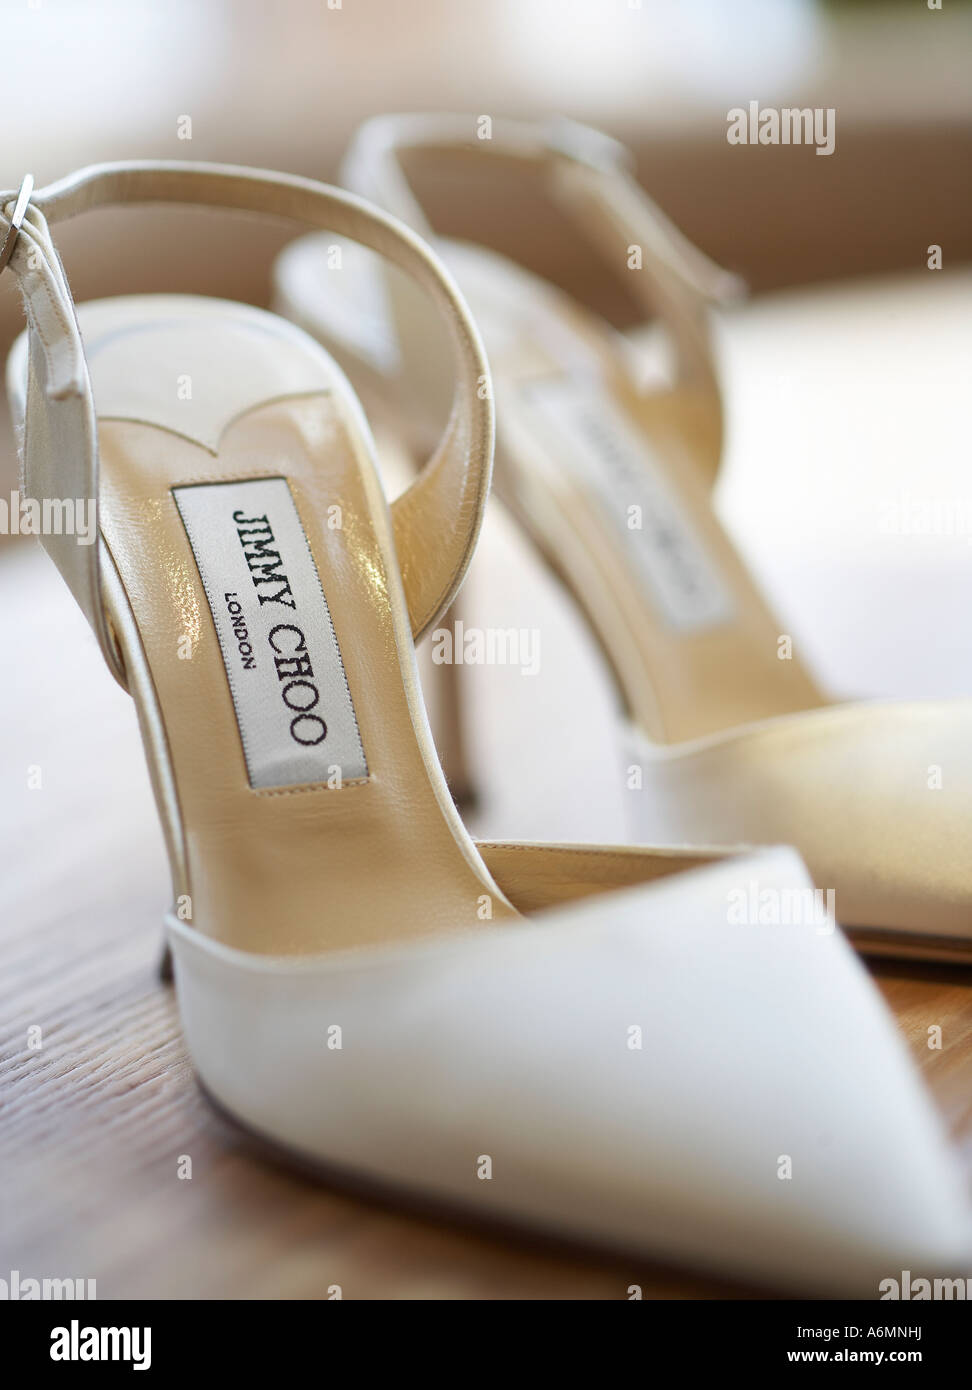 Pair of Jimmy Choo shoes Stock Photo